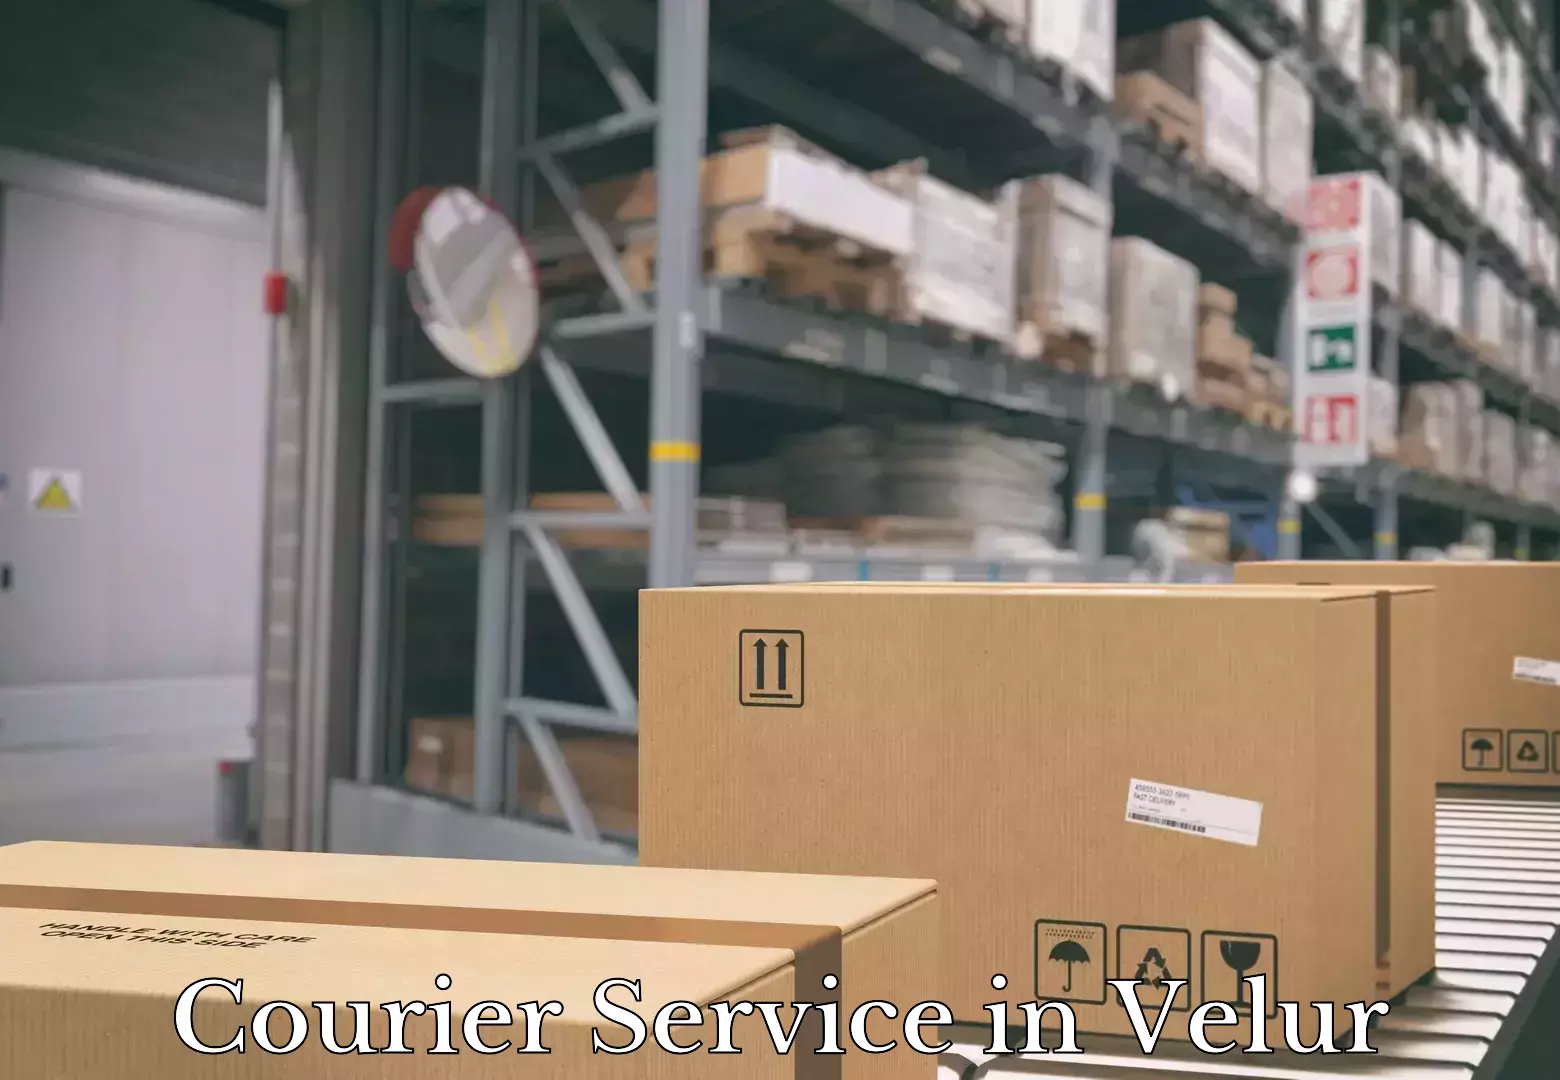 Flexible delivery schedules in Velur